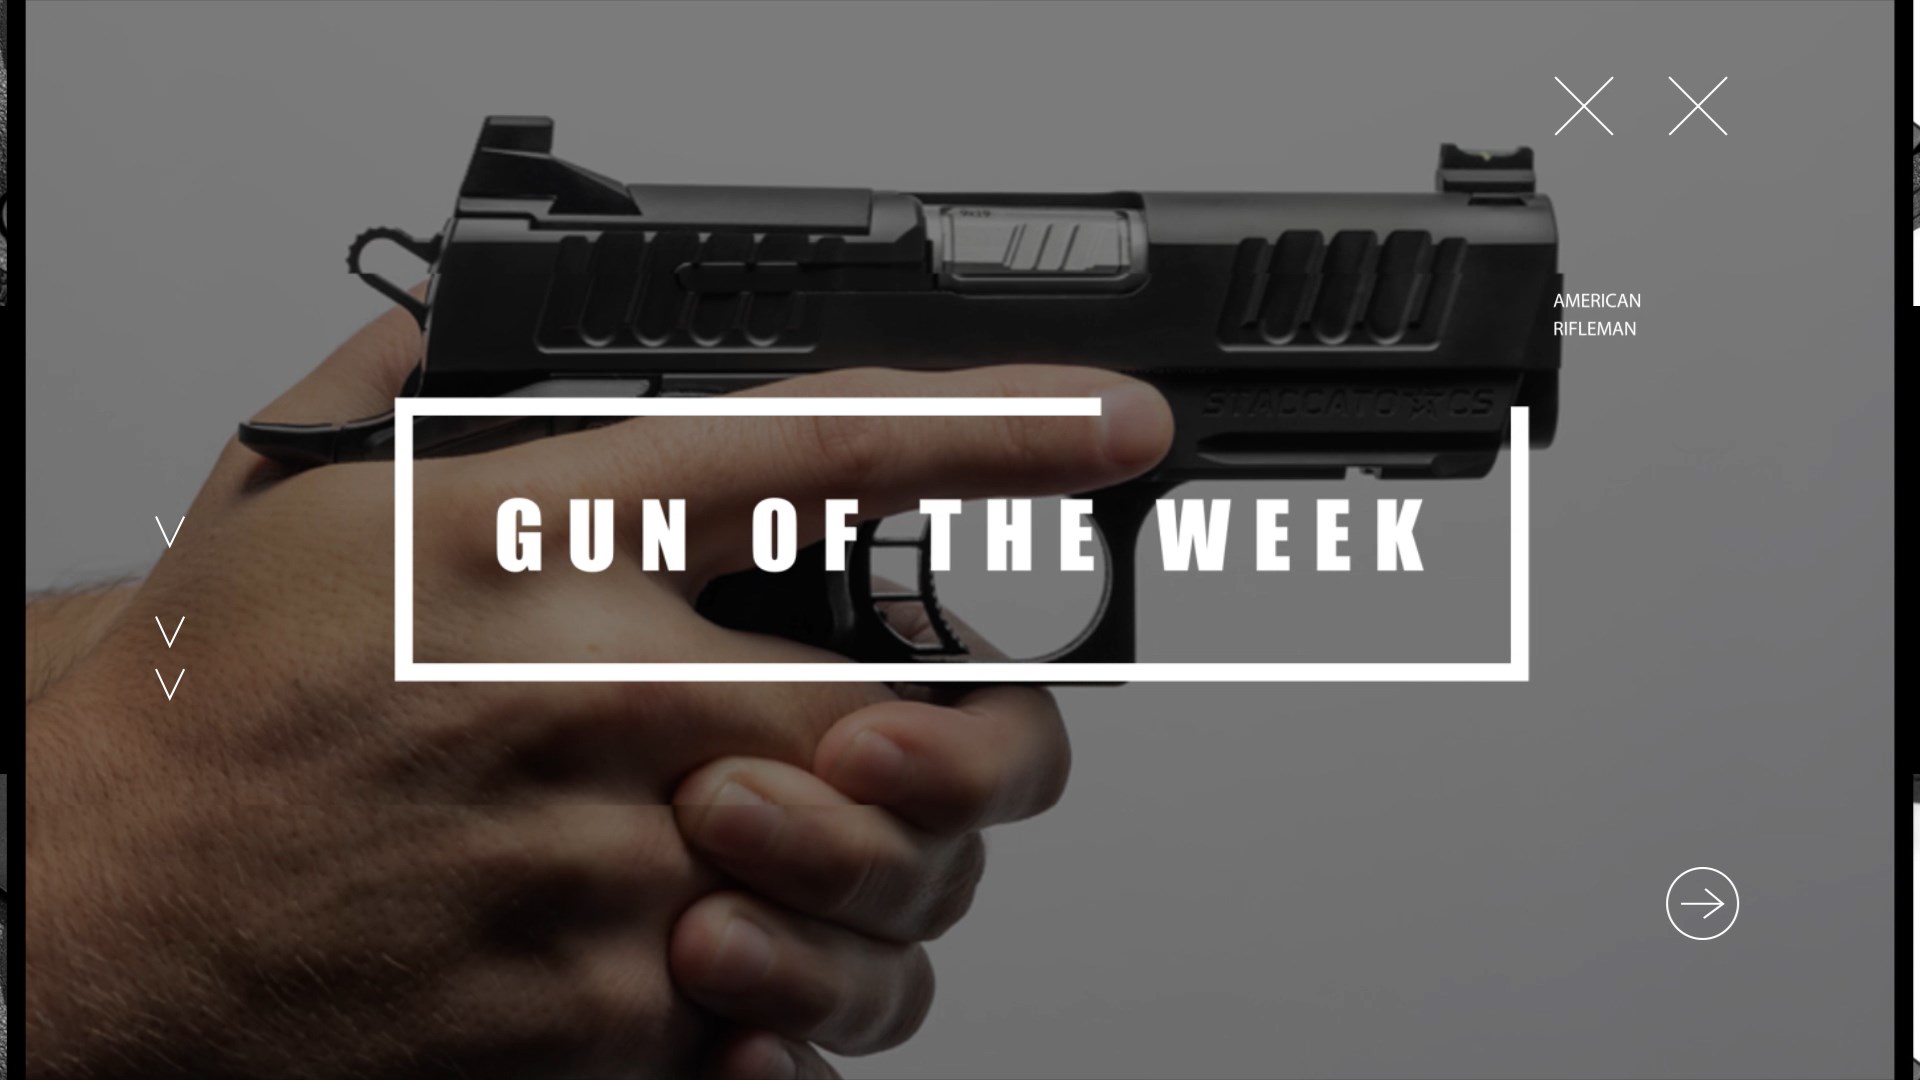 GUN OF THE WEEK video title screen hands holding black staccato cs pistol compact hybrid m1911 double-stack handgun point to right side text on image title